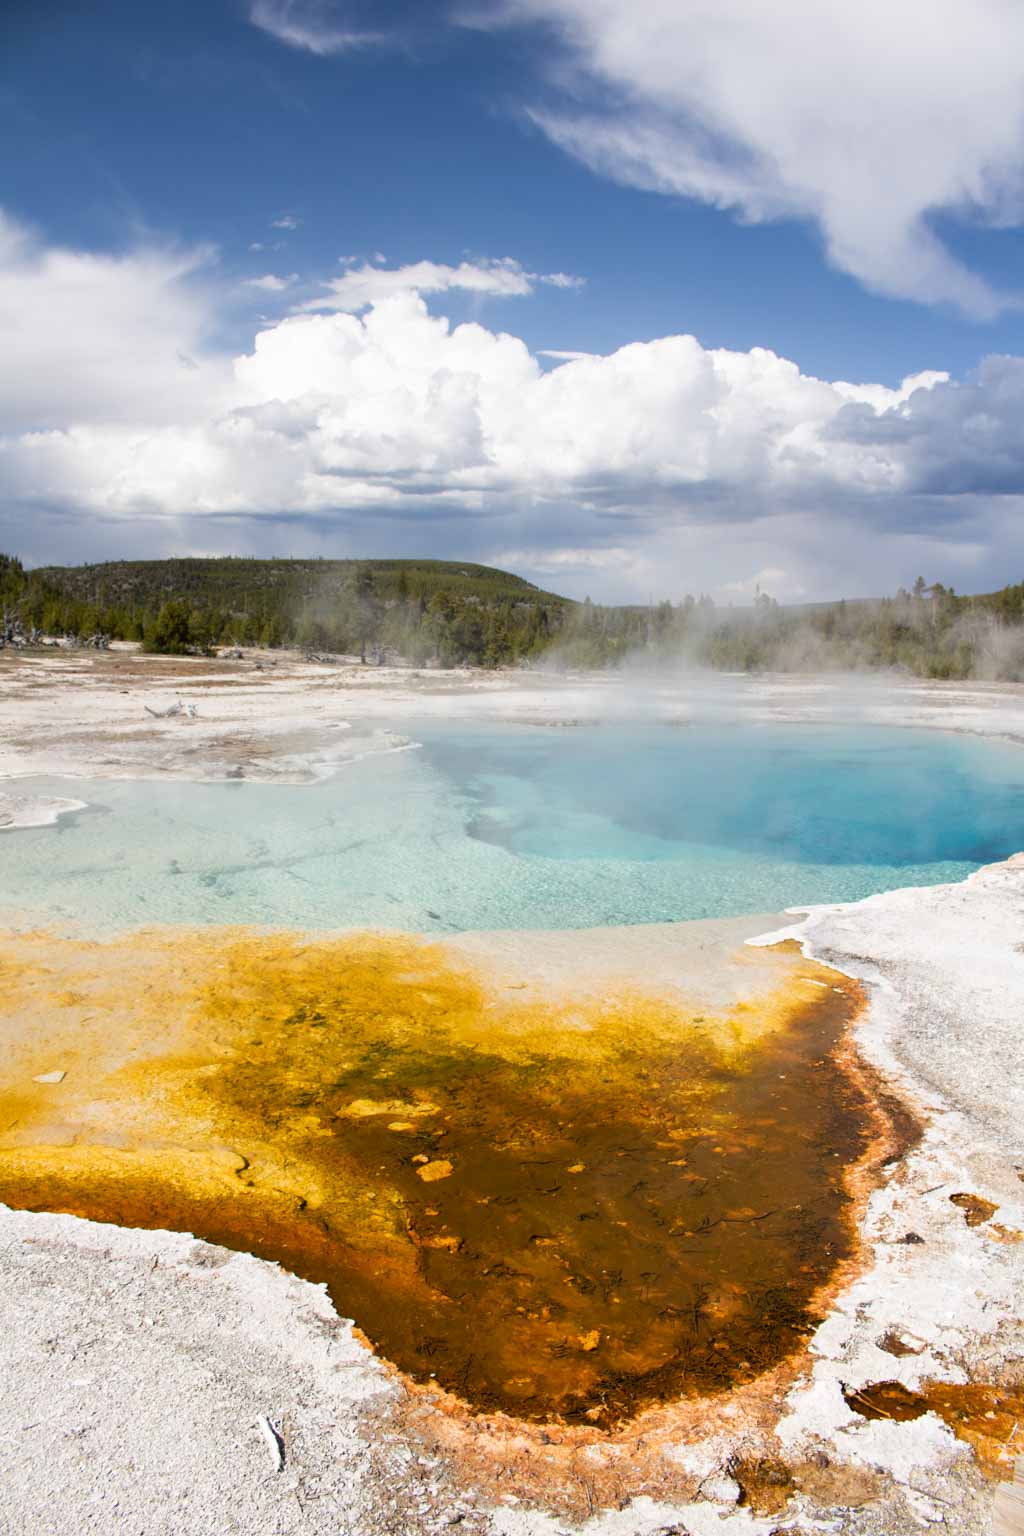 Sapphire Pool is one of the most spectacular hot springs in Biscuit Basin, Yellowstone National Park